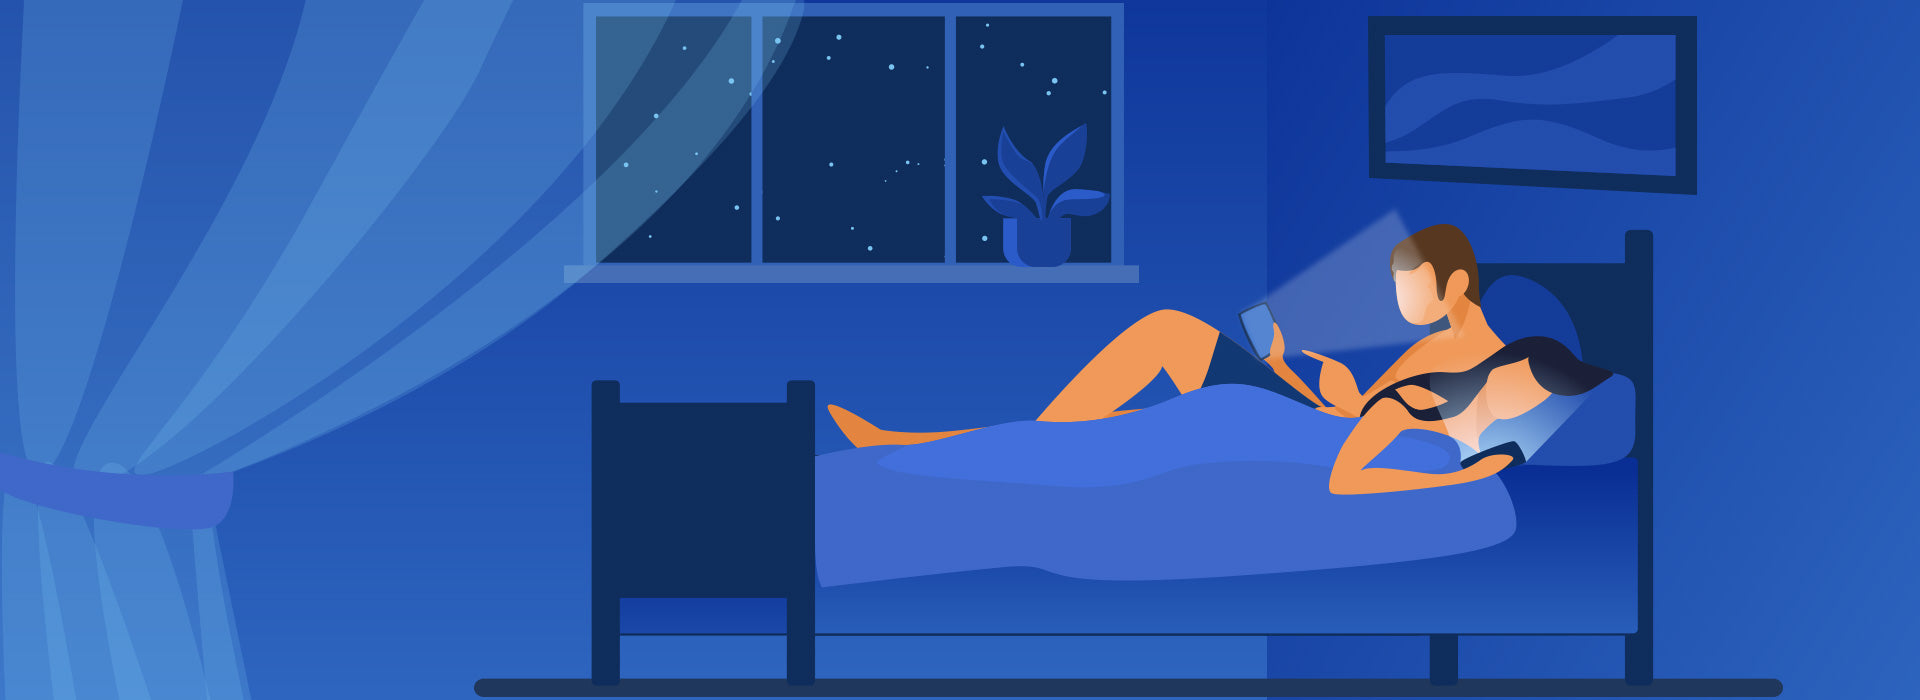 Mobile phones and sleep: Why (and where) you should put your phone away at night